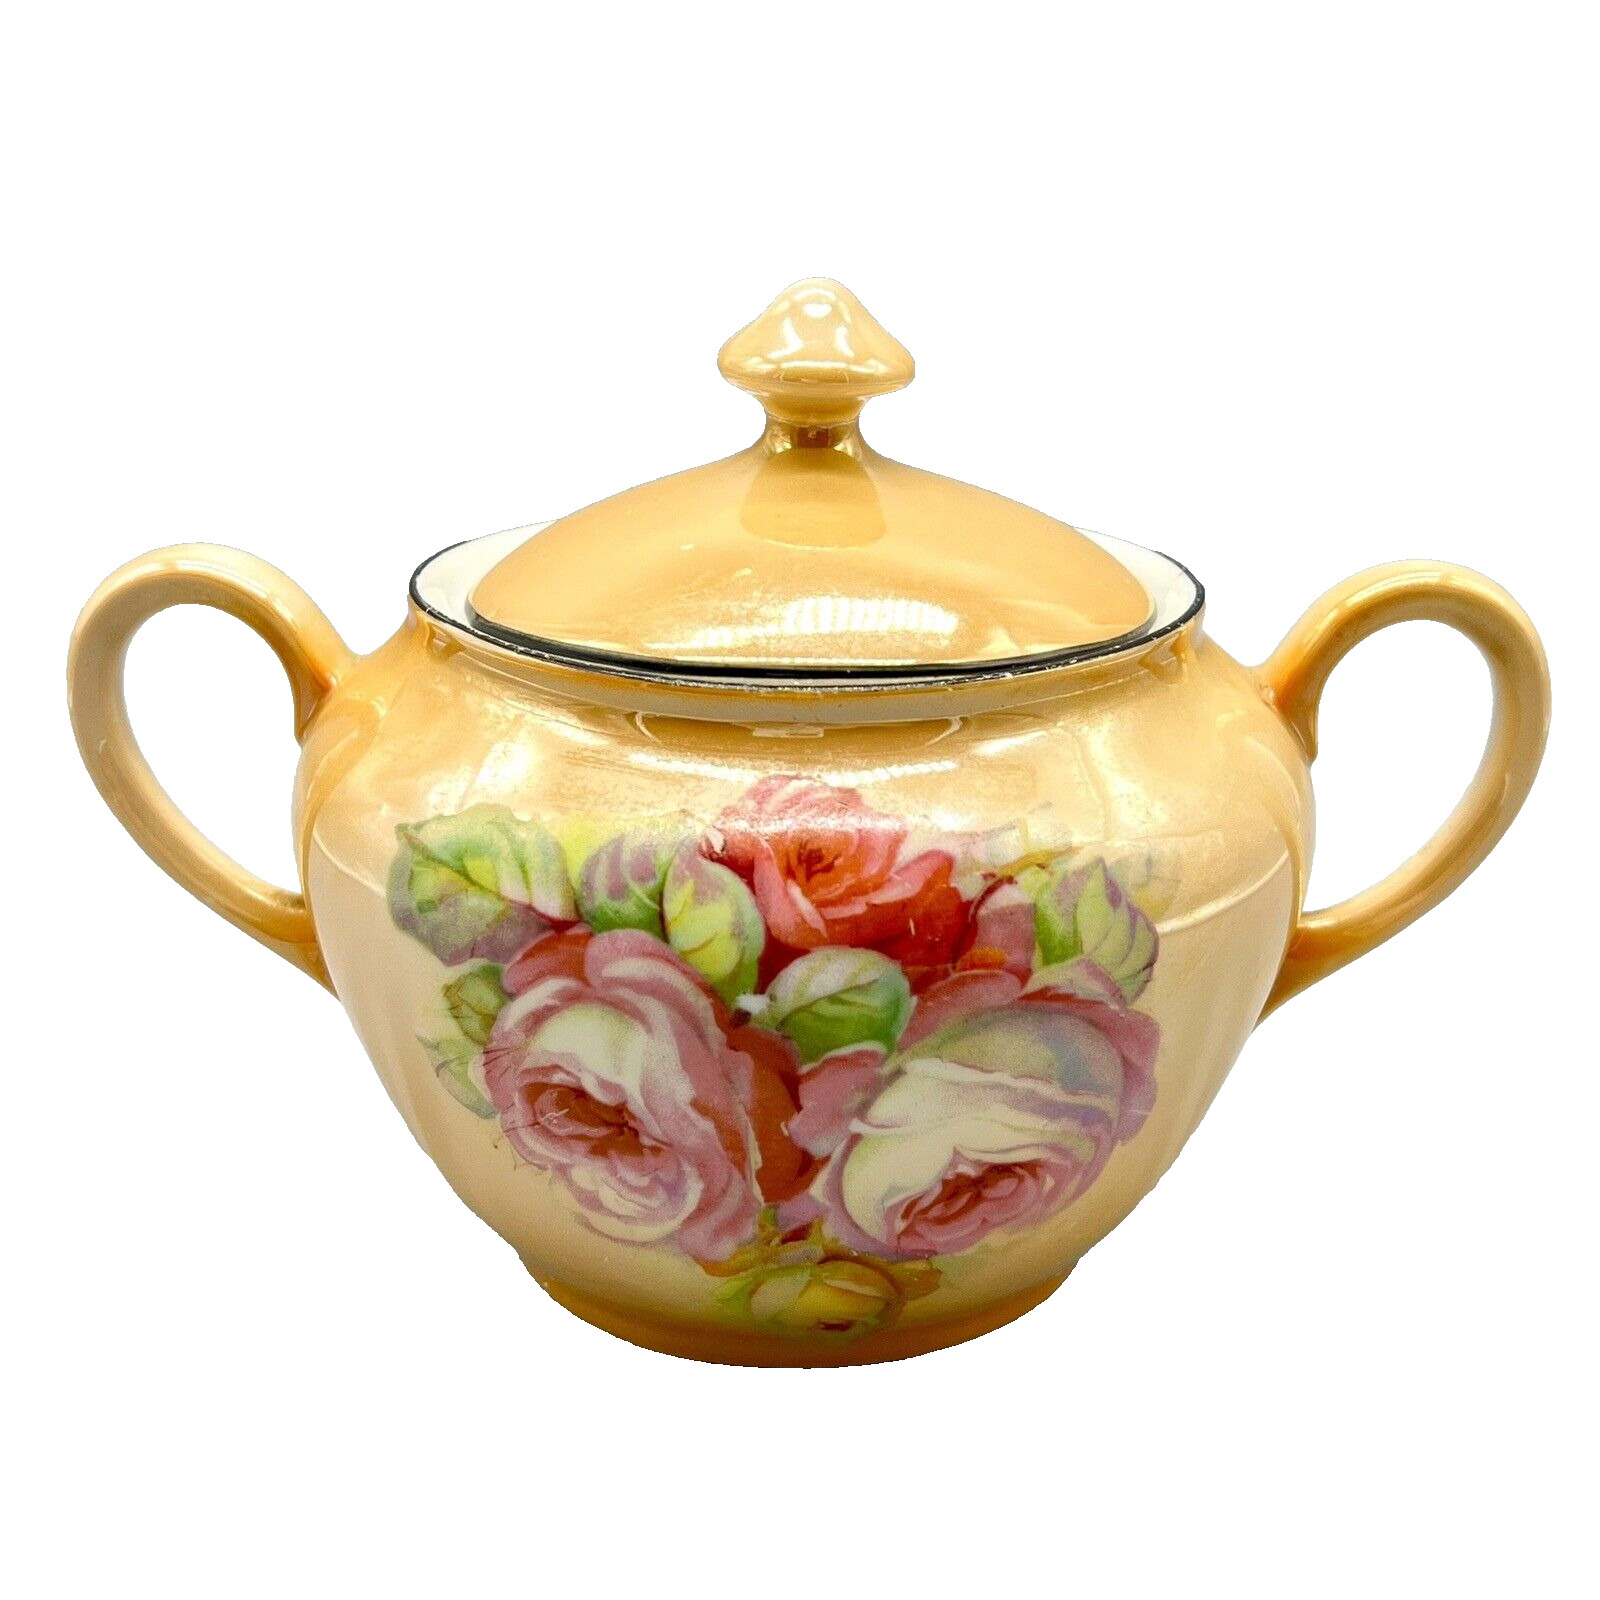 Vintage Peach Lusterware Sugar Bowl with Roses and Lid P.A.L.T. Czecho-Slovakia